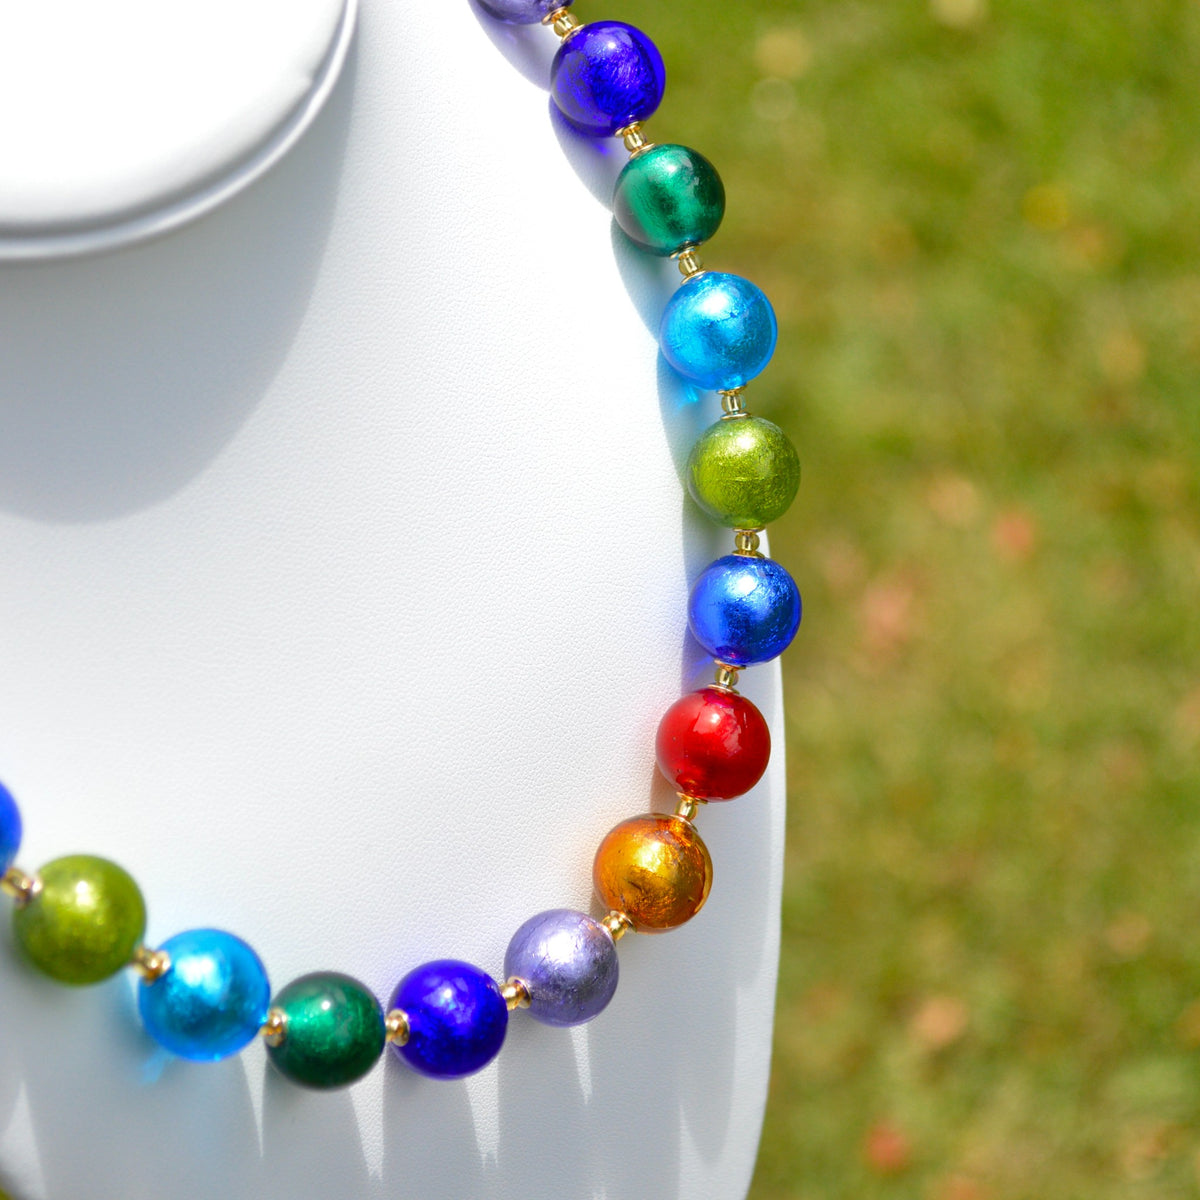 Diva Murano Glass Beaded Necklace, Multi-Color Glass Beads, Handcrafted In Italy - My Italian Decor